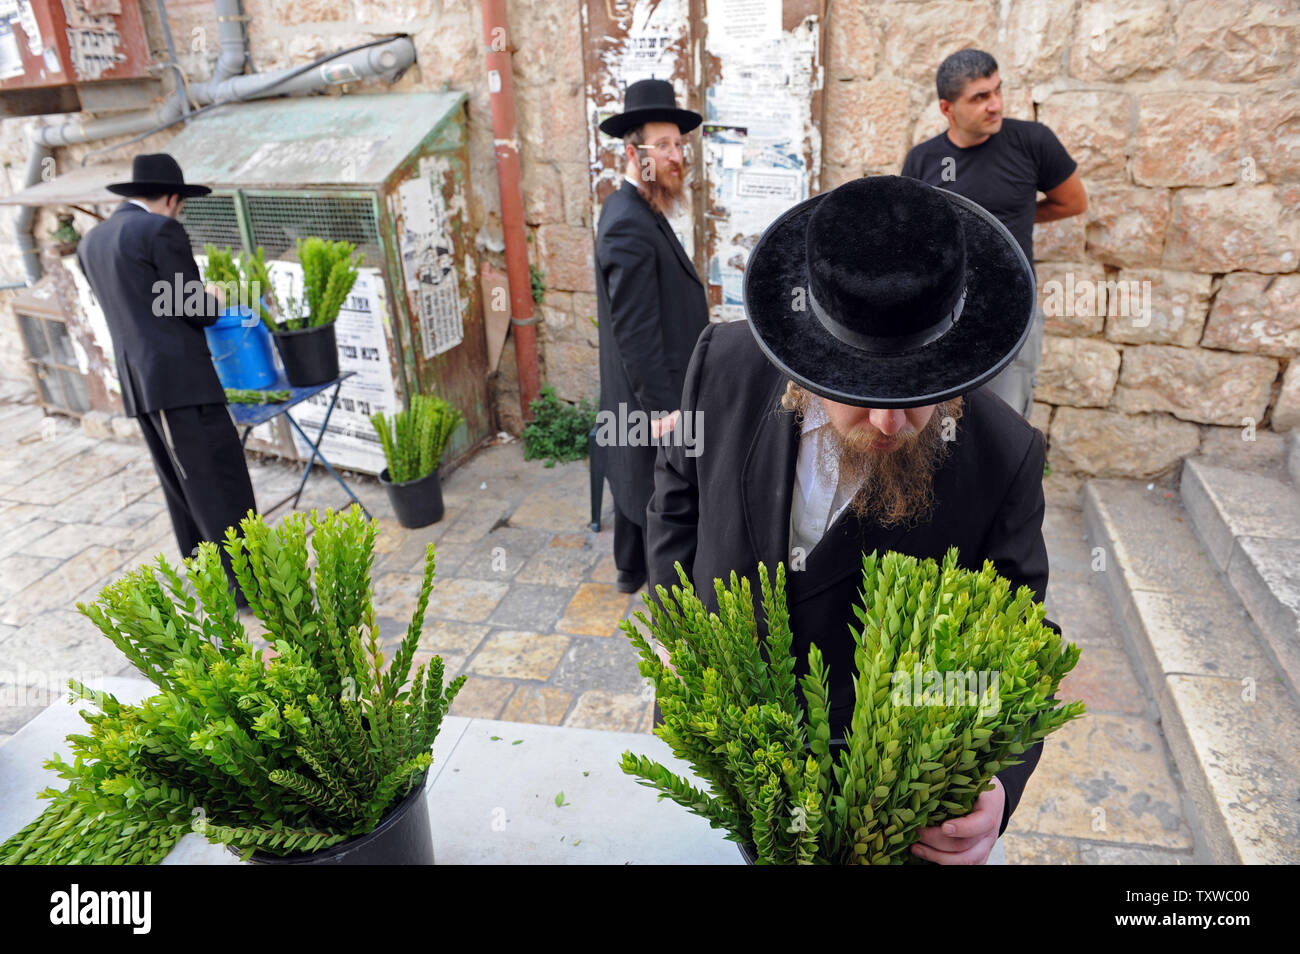 An Ultra-Orthodox Jewish man inspects hadas, myrtle branches, one of the four plant species to be used during the celebration of Sukkot,the Feast of Tabernacles, in Mea Shearim in Jerusalem, October 10, 2011. The Sukkot feast begins on October 13 and commemorates the exodus of the Jews from Egypt.   UPI/Debbie Hill Stock Photo